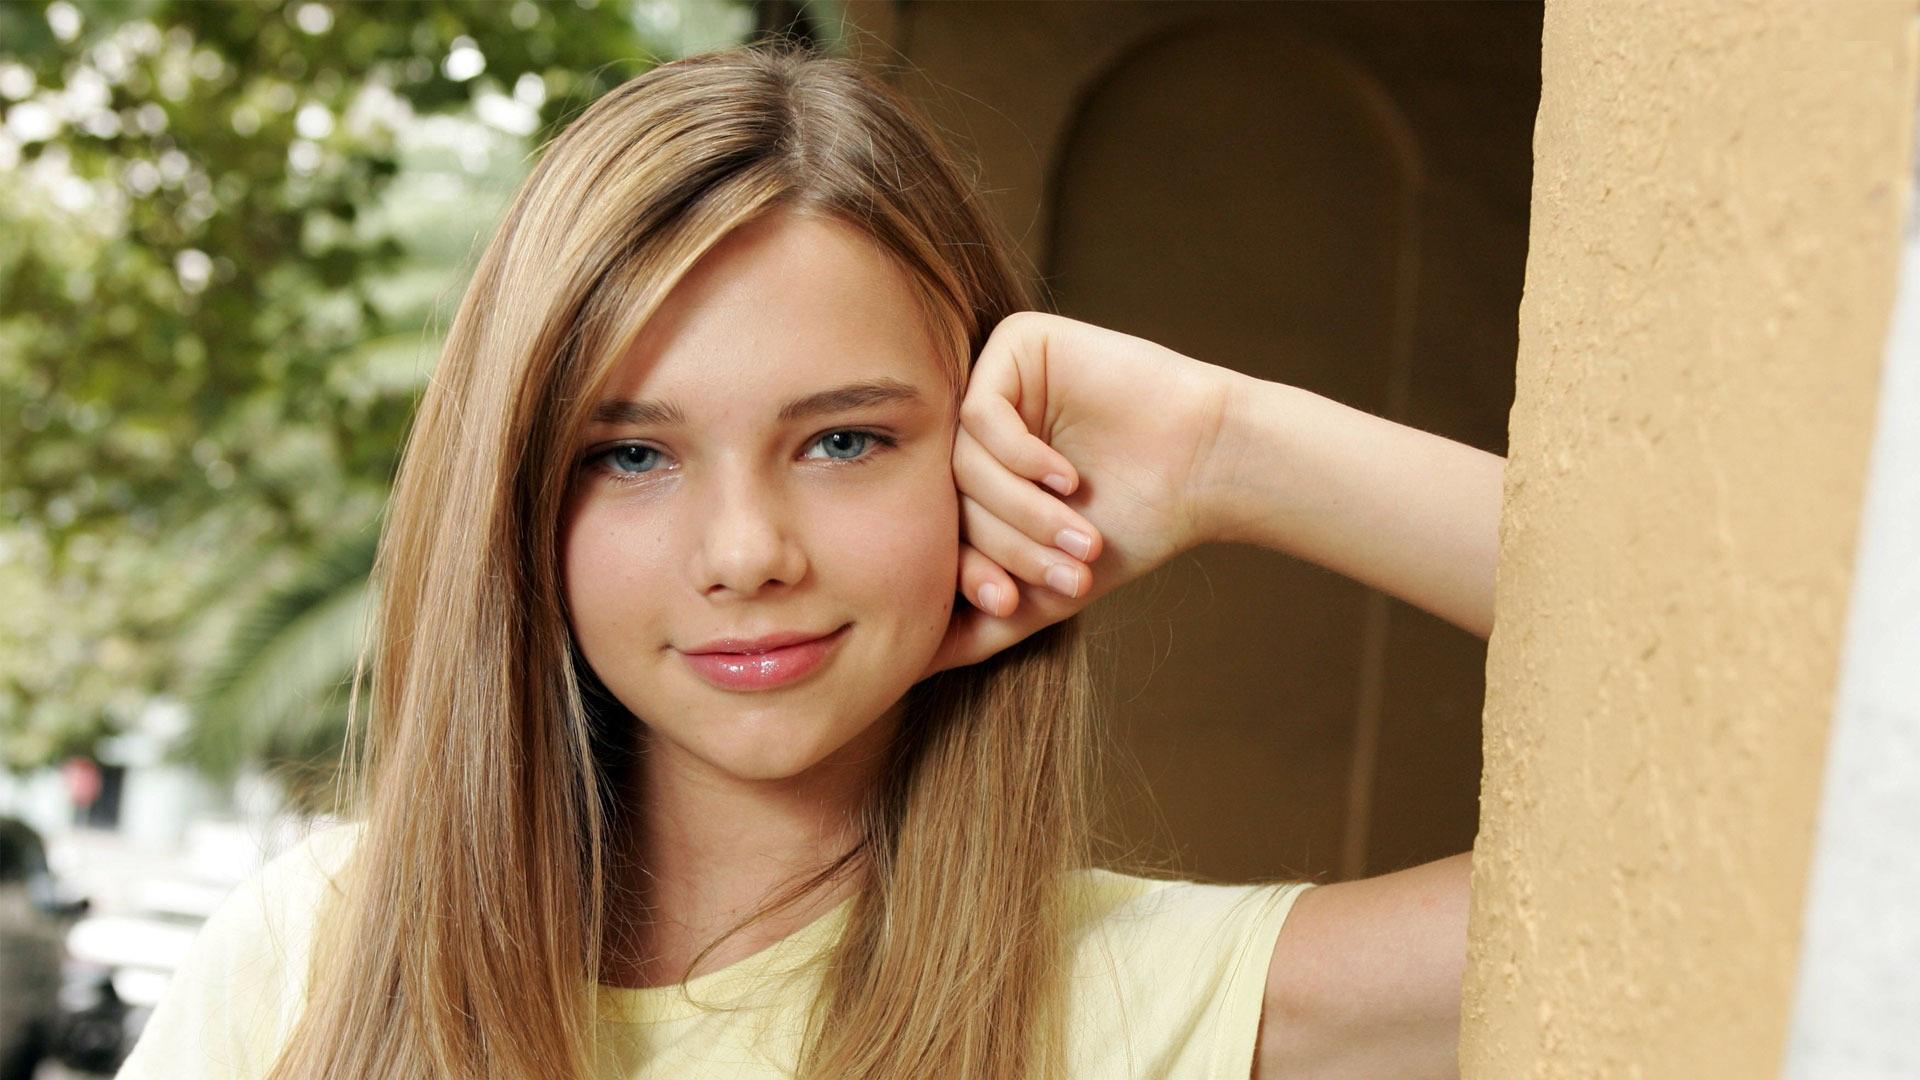 Indiana Evans HD wallpapers 